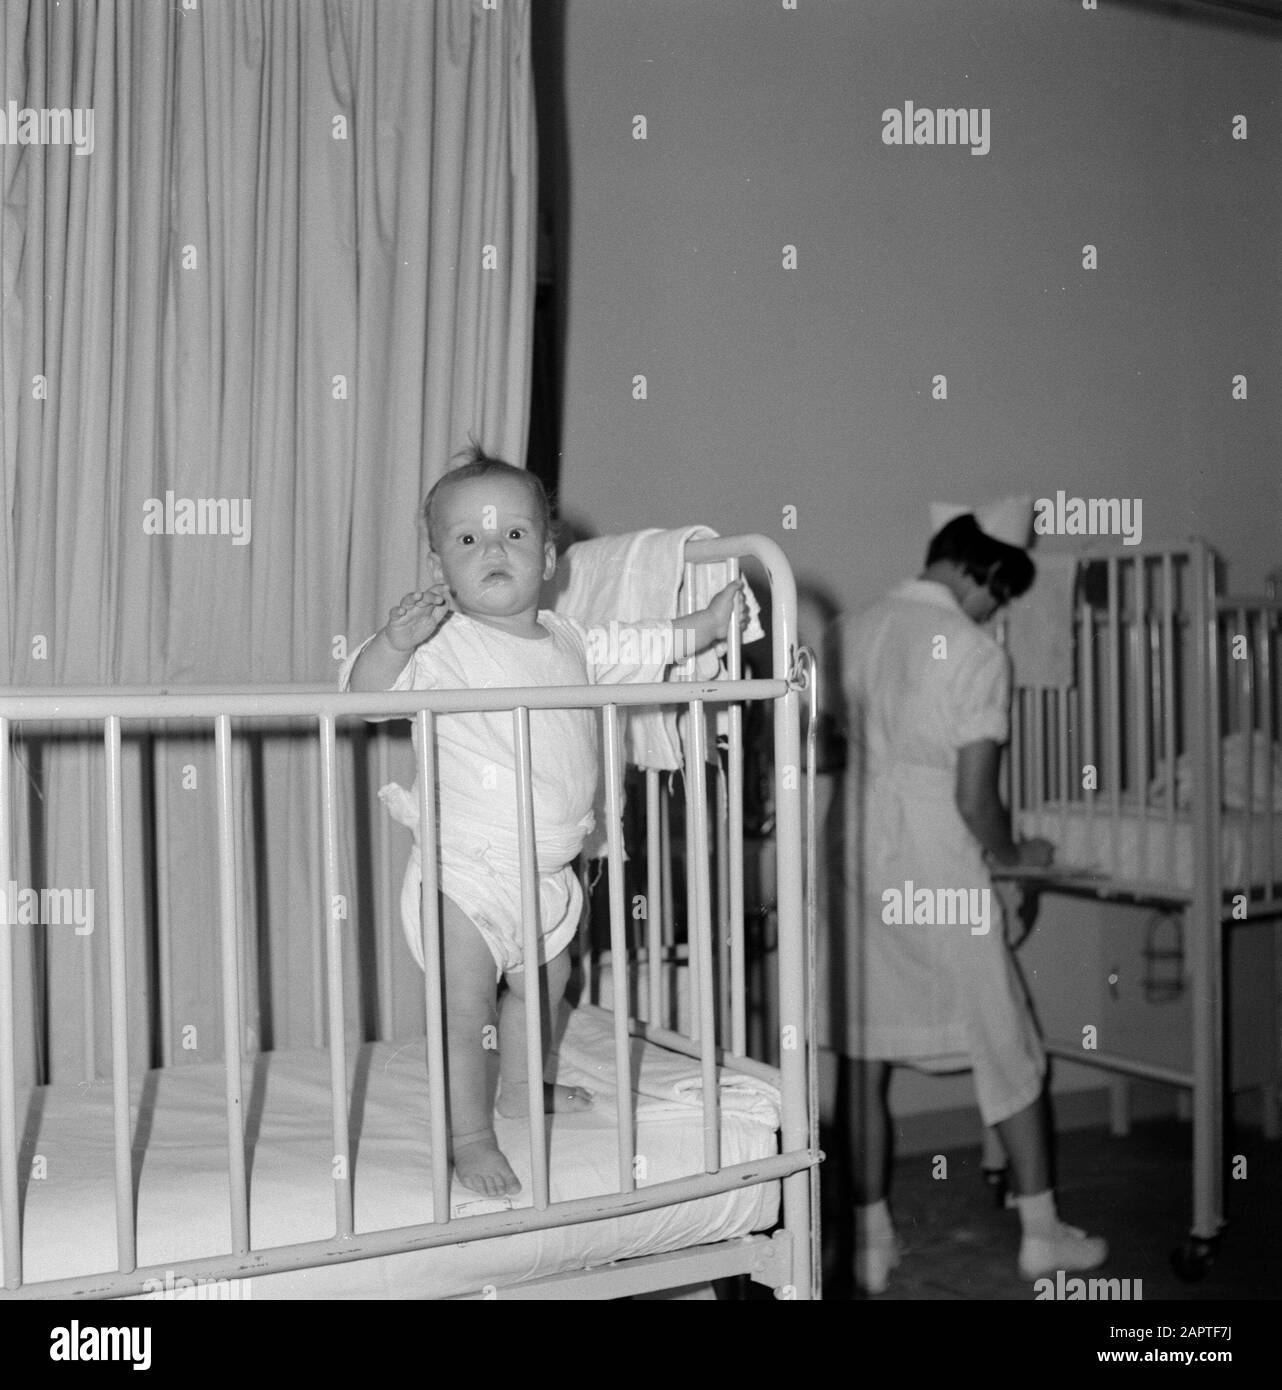 Hadassah university medical center. Department of Pediatrics. A patientje standing in bed Date: 1960 Location: Israel Keywords: beds, children, hospitals Stock Photo